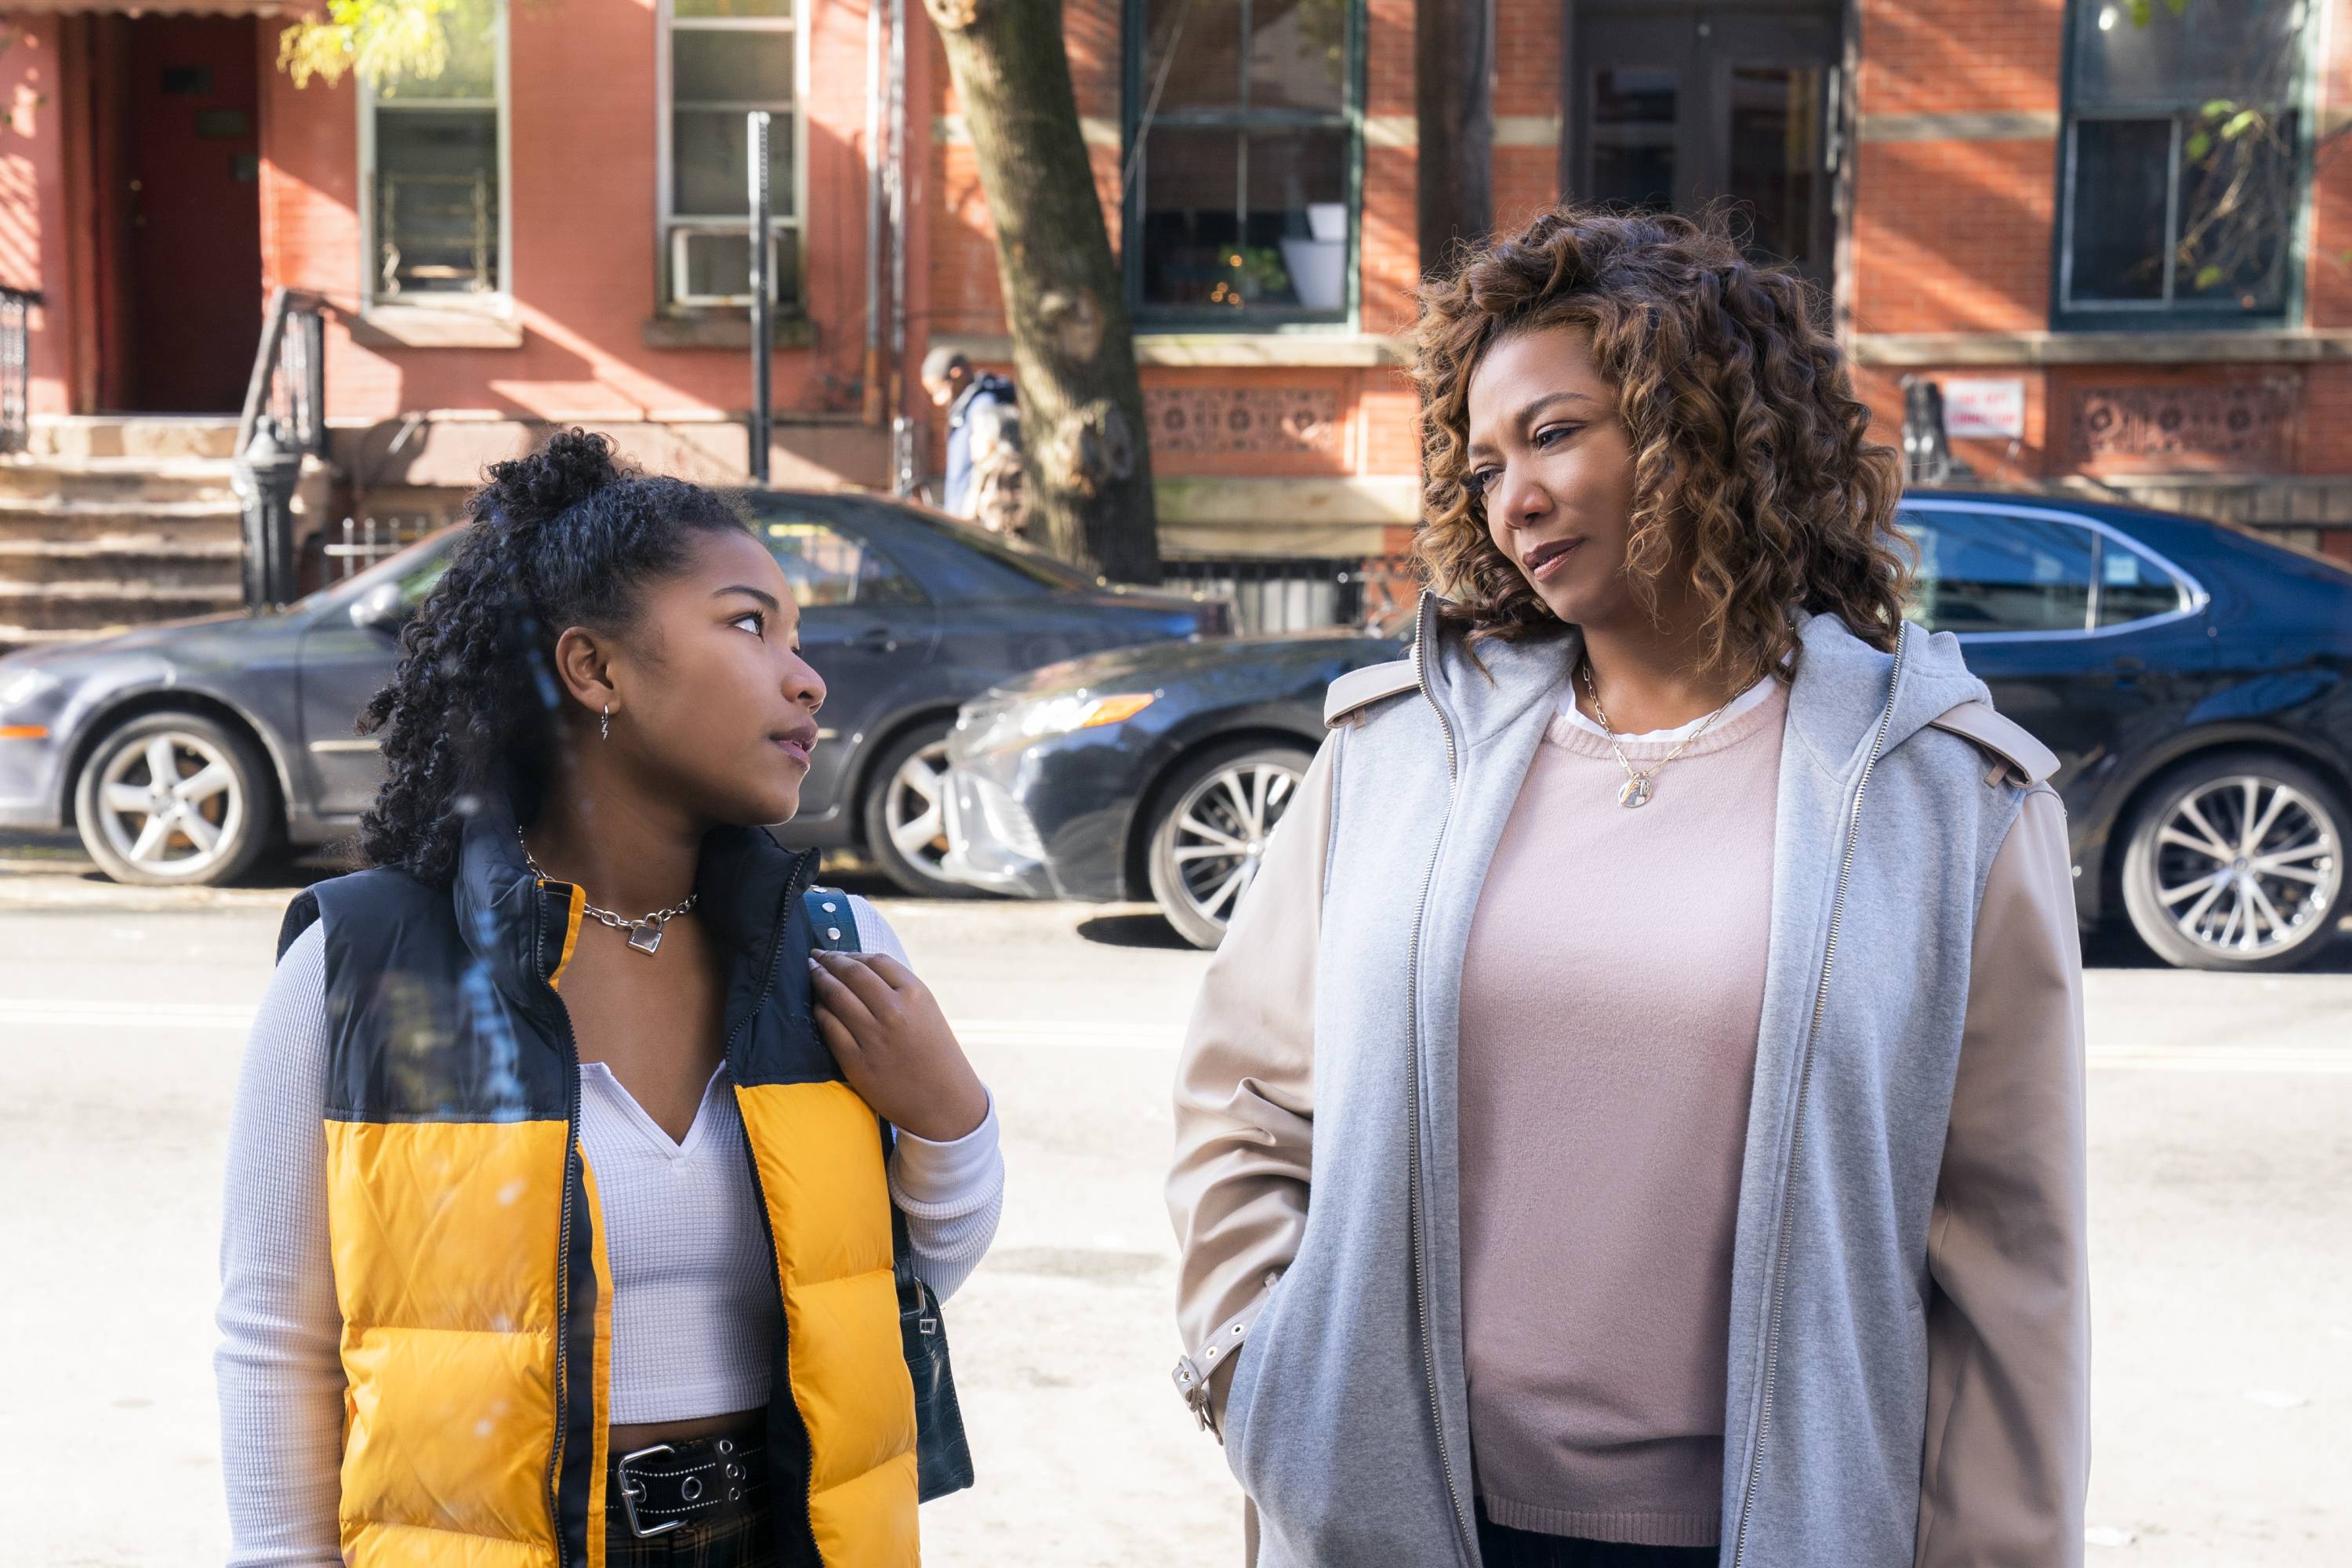 JERSEY CITY - NOVEMBER 23: The series premiere of the CBS Original drama THE EQUALIZER, starring Academy Award nominee and multi-hyphenate Queen Latifah, will be broadcast immediately following Super Bowl LV on Sunday, Feb. 7, 2021 (10:00-11:00 PM, ET/7:00-8:00 PM, PT; time is approximate after post-game coverage) on the CBS Television Network. THE EQUALIZER will move to its regular Sunday (8:00-9:00 PM, ET/PT) time period on Feb. 14, 2021. Pictured (L-R): Laya DeLeon Hayes as Delilah and Queen Latifah as Robyn McCall. (Photo by Barbara Nitke/CBS via Getty Images)